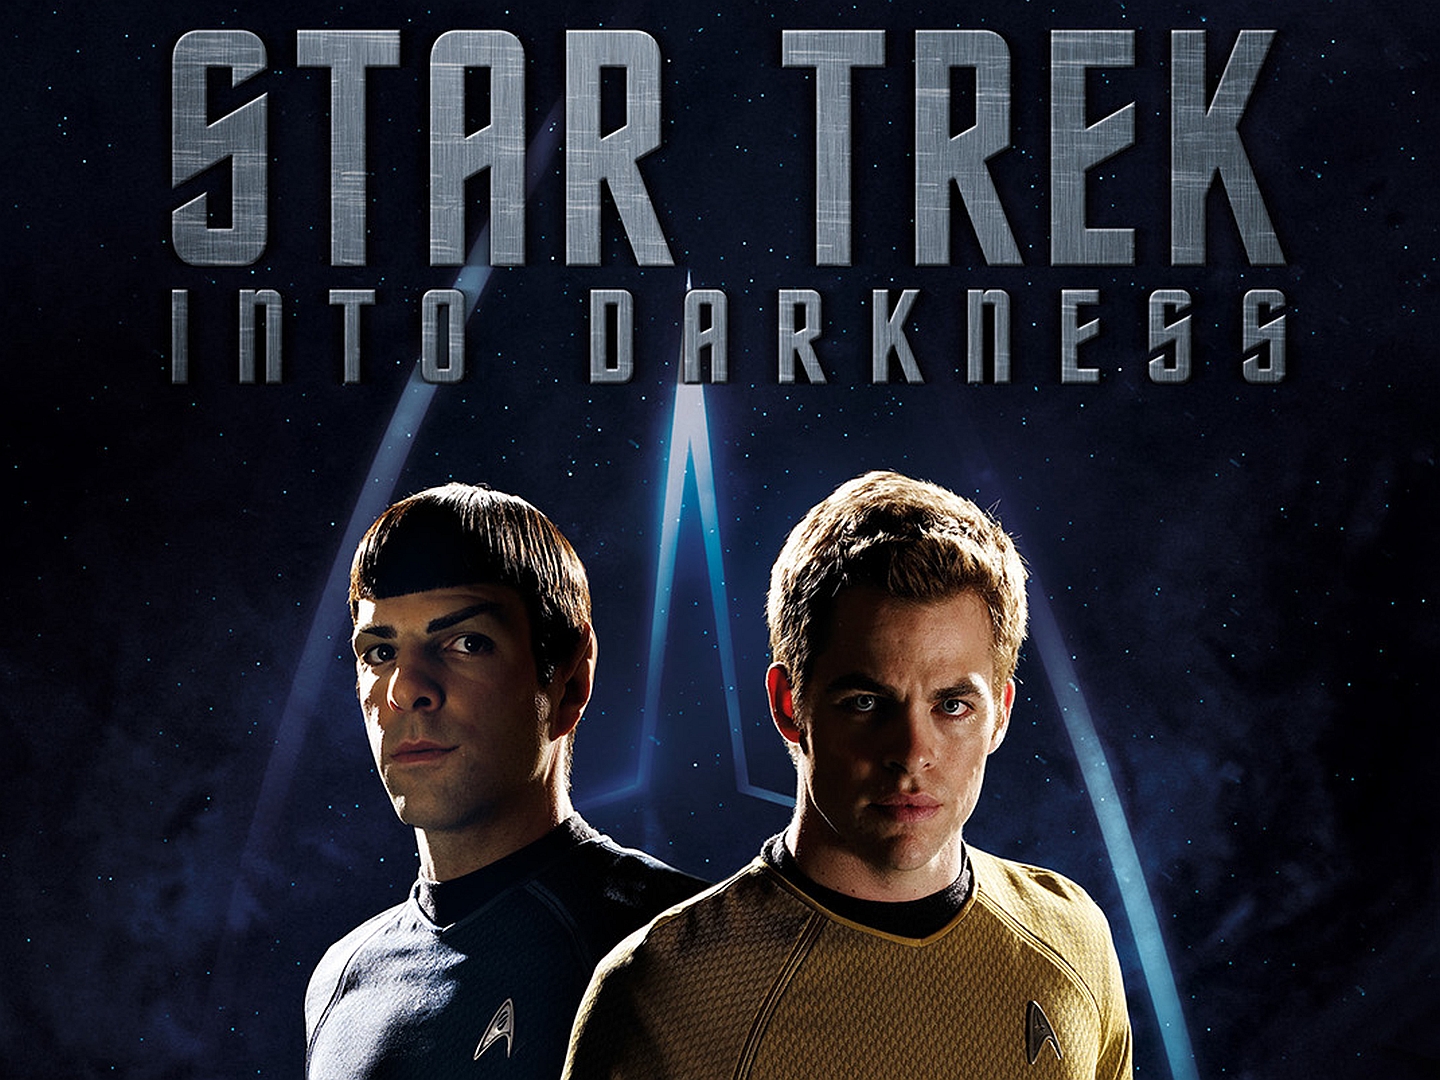 Star Trek Into Darkness Wallpaper and Background Image | 1440x1080